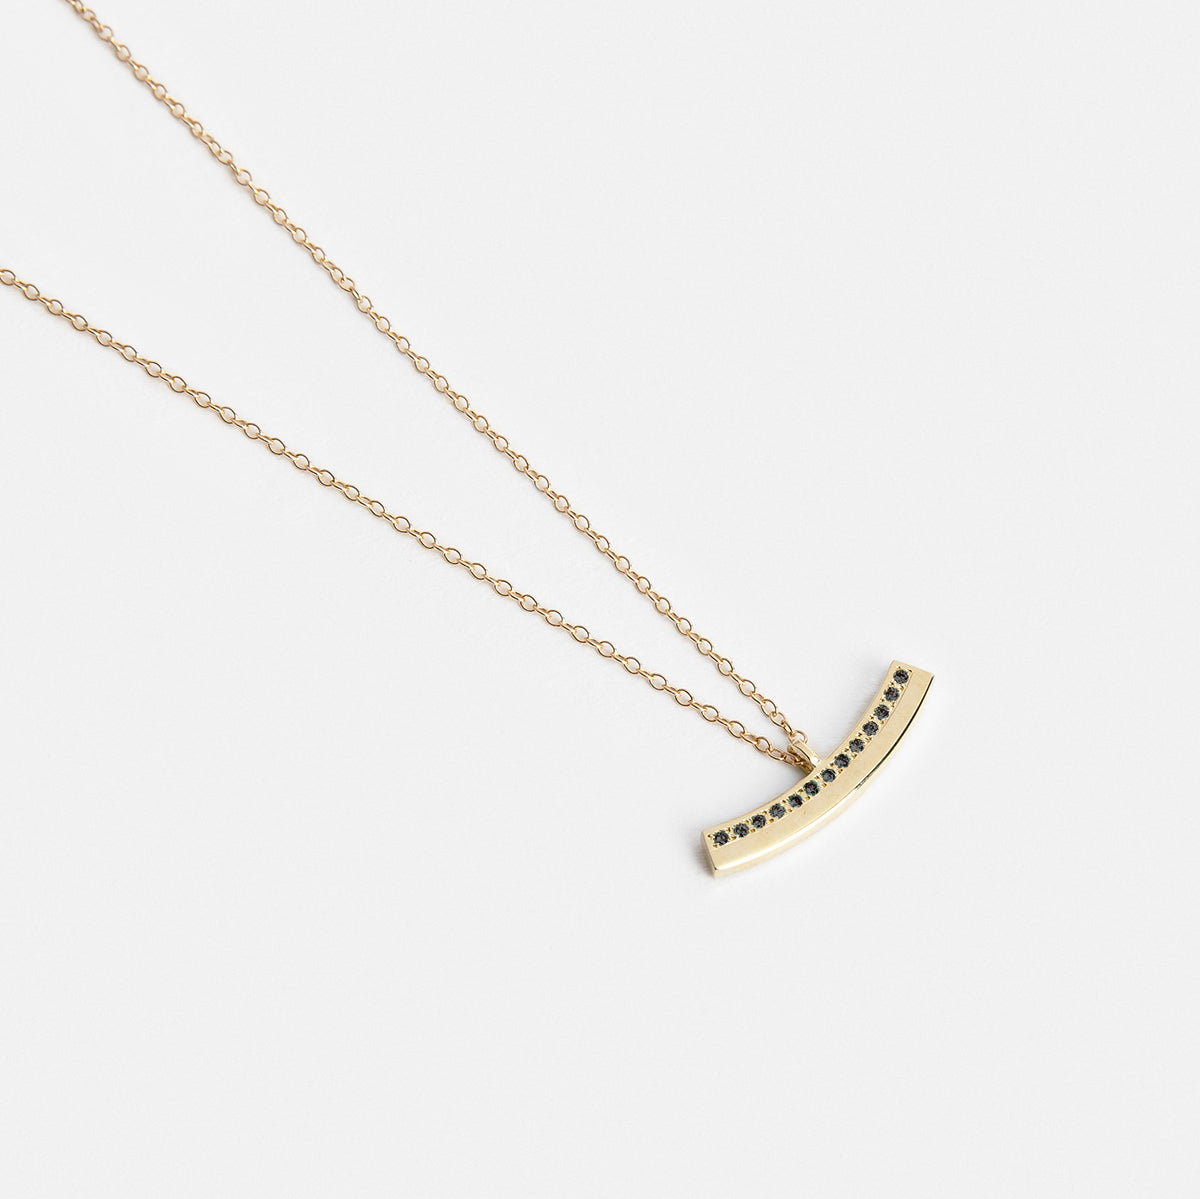 Era Delicate Necklace in 14k Gold set with Black Diamonds By SHW Fine Jewelry NYC